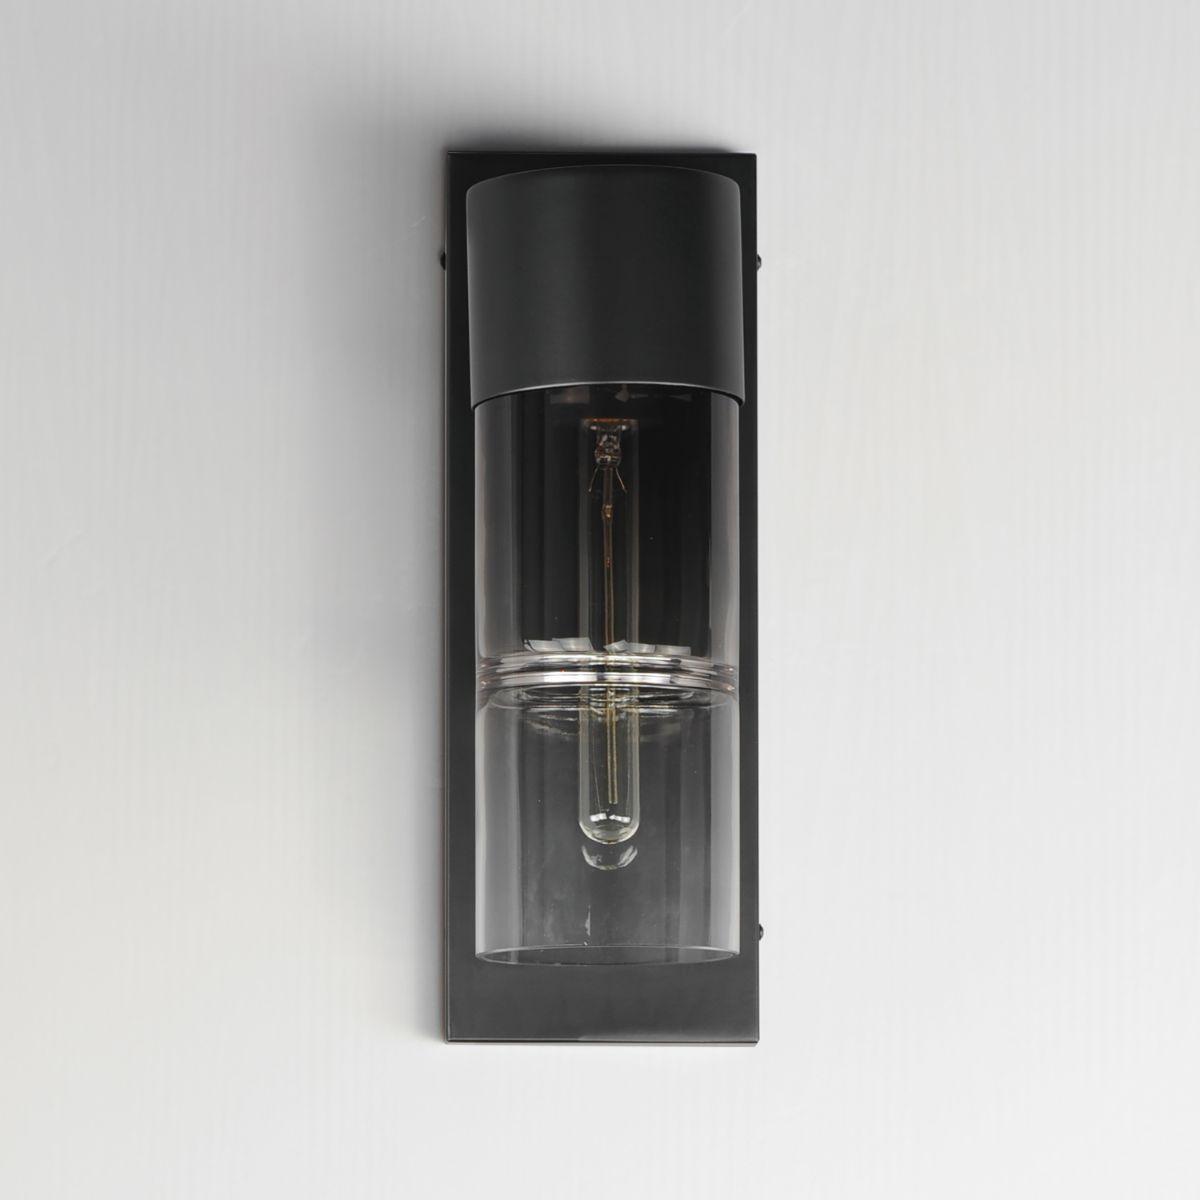 Smokestack 17 in. LED Outdoor Wall Sconce Black Finish